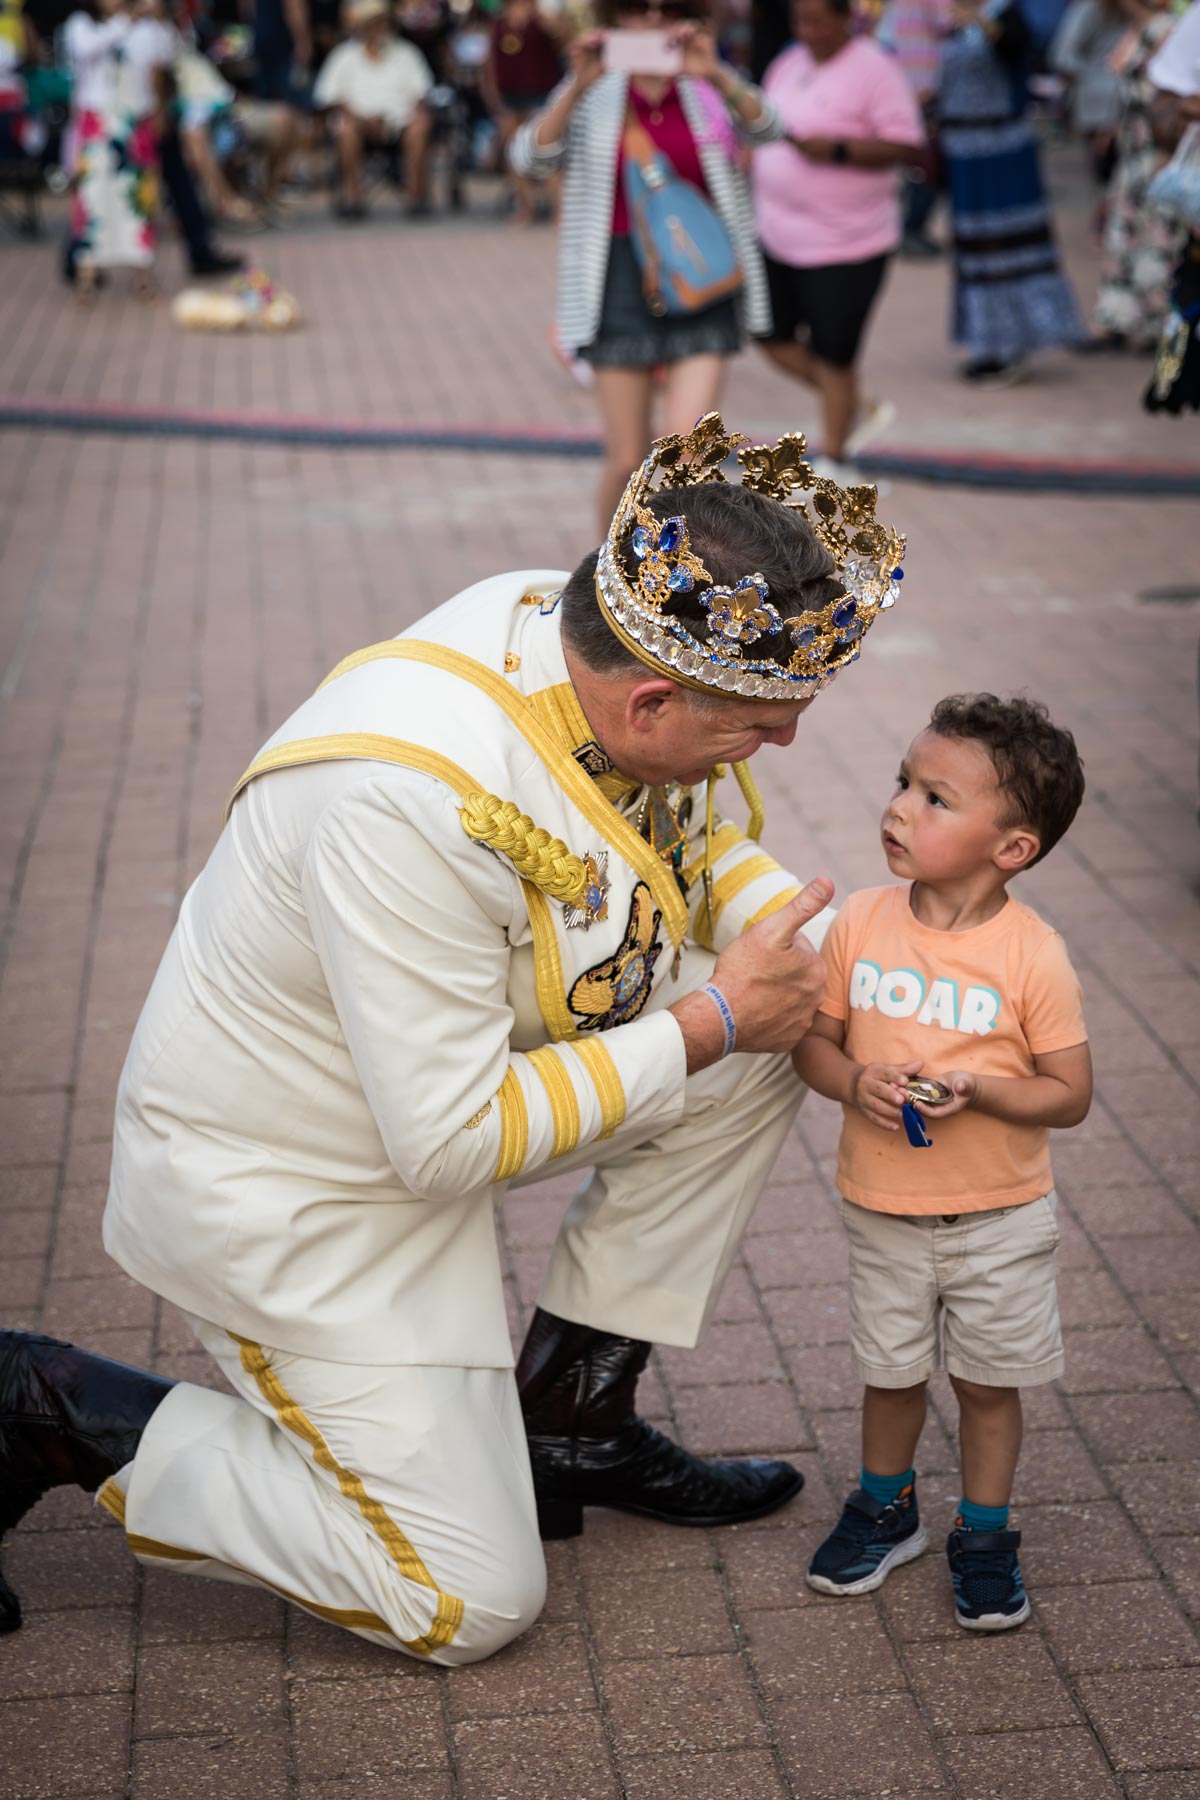 Rey Feo wearing crown and bending down to talk with little boy for an article on the best Fiesta photos